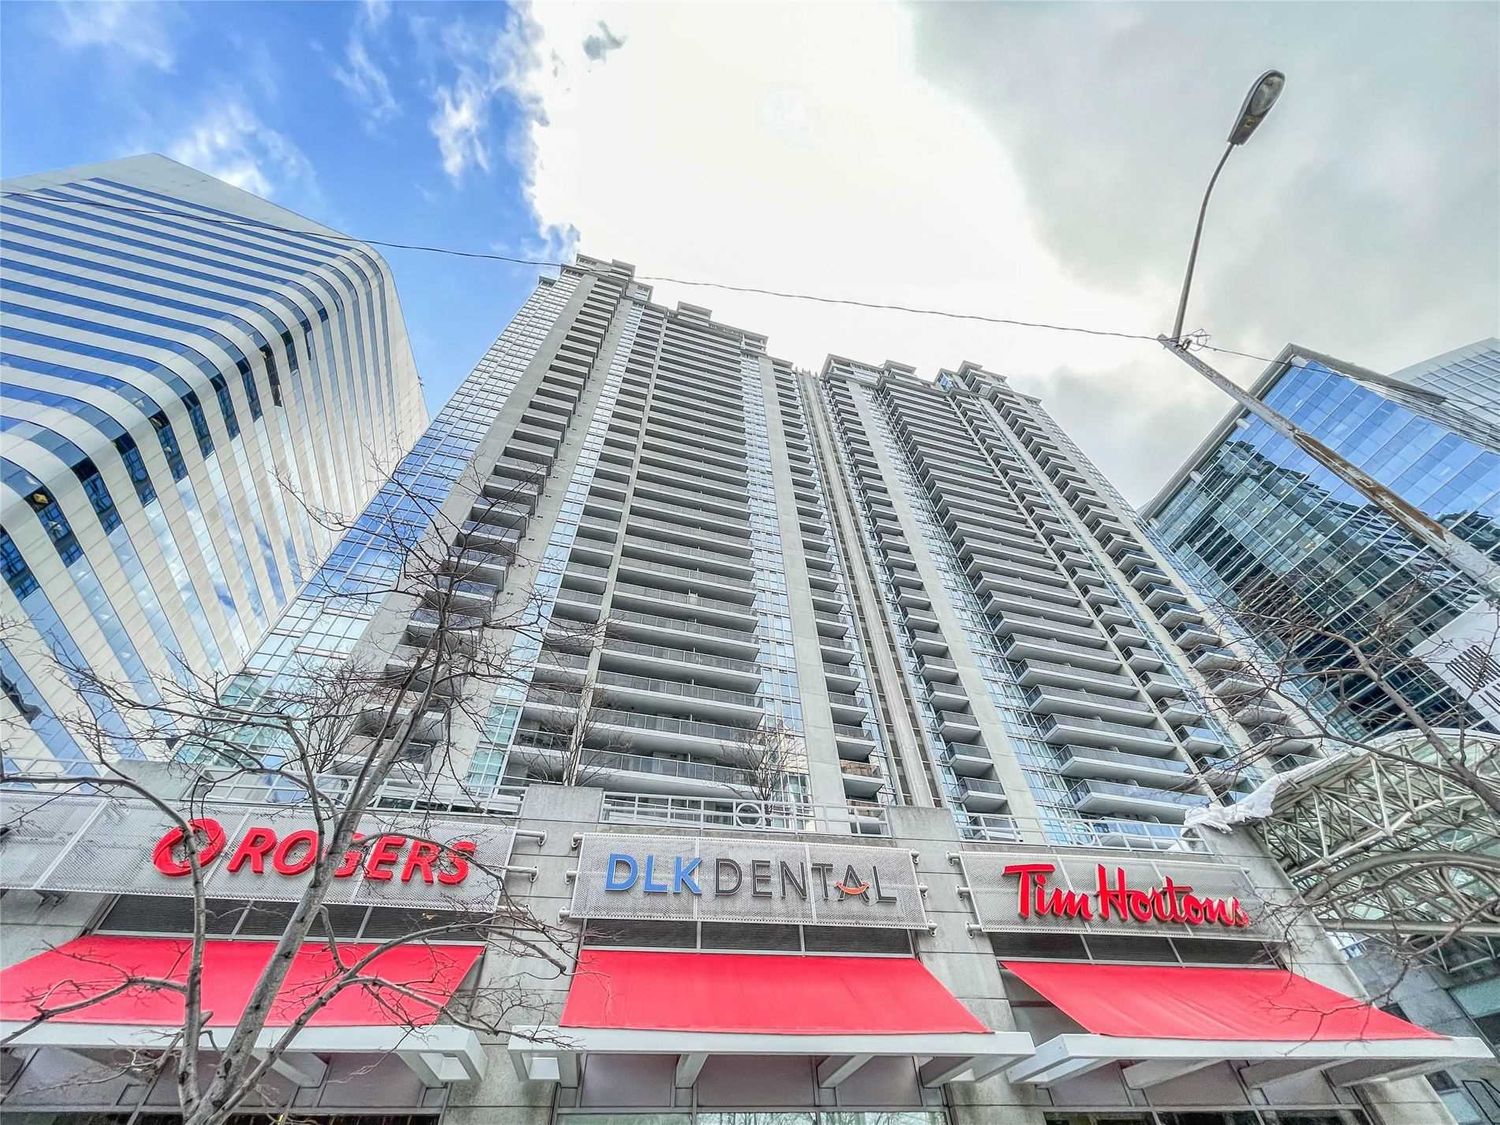 4968 Yonge Street. Ultima At Broadway Condos is located in  North York, Toronto - image #2 of 2